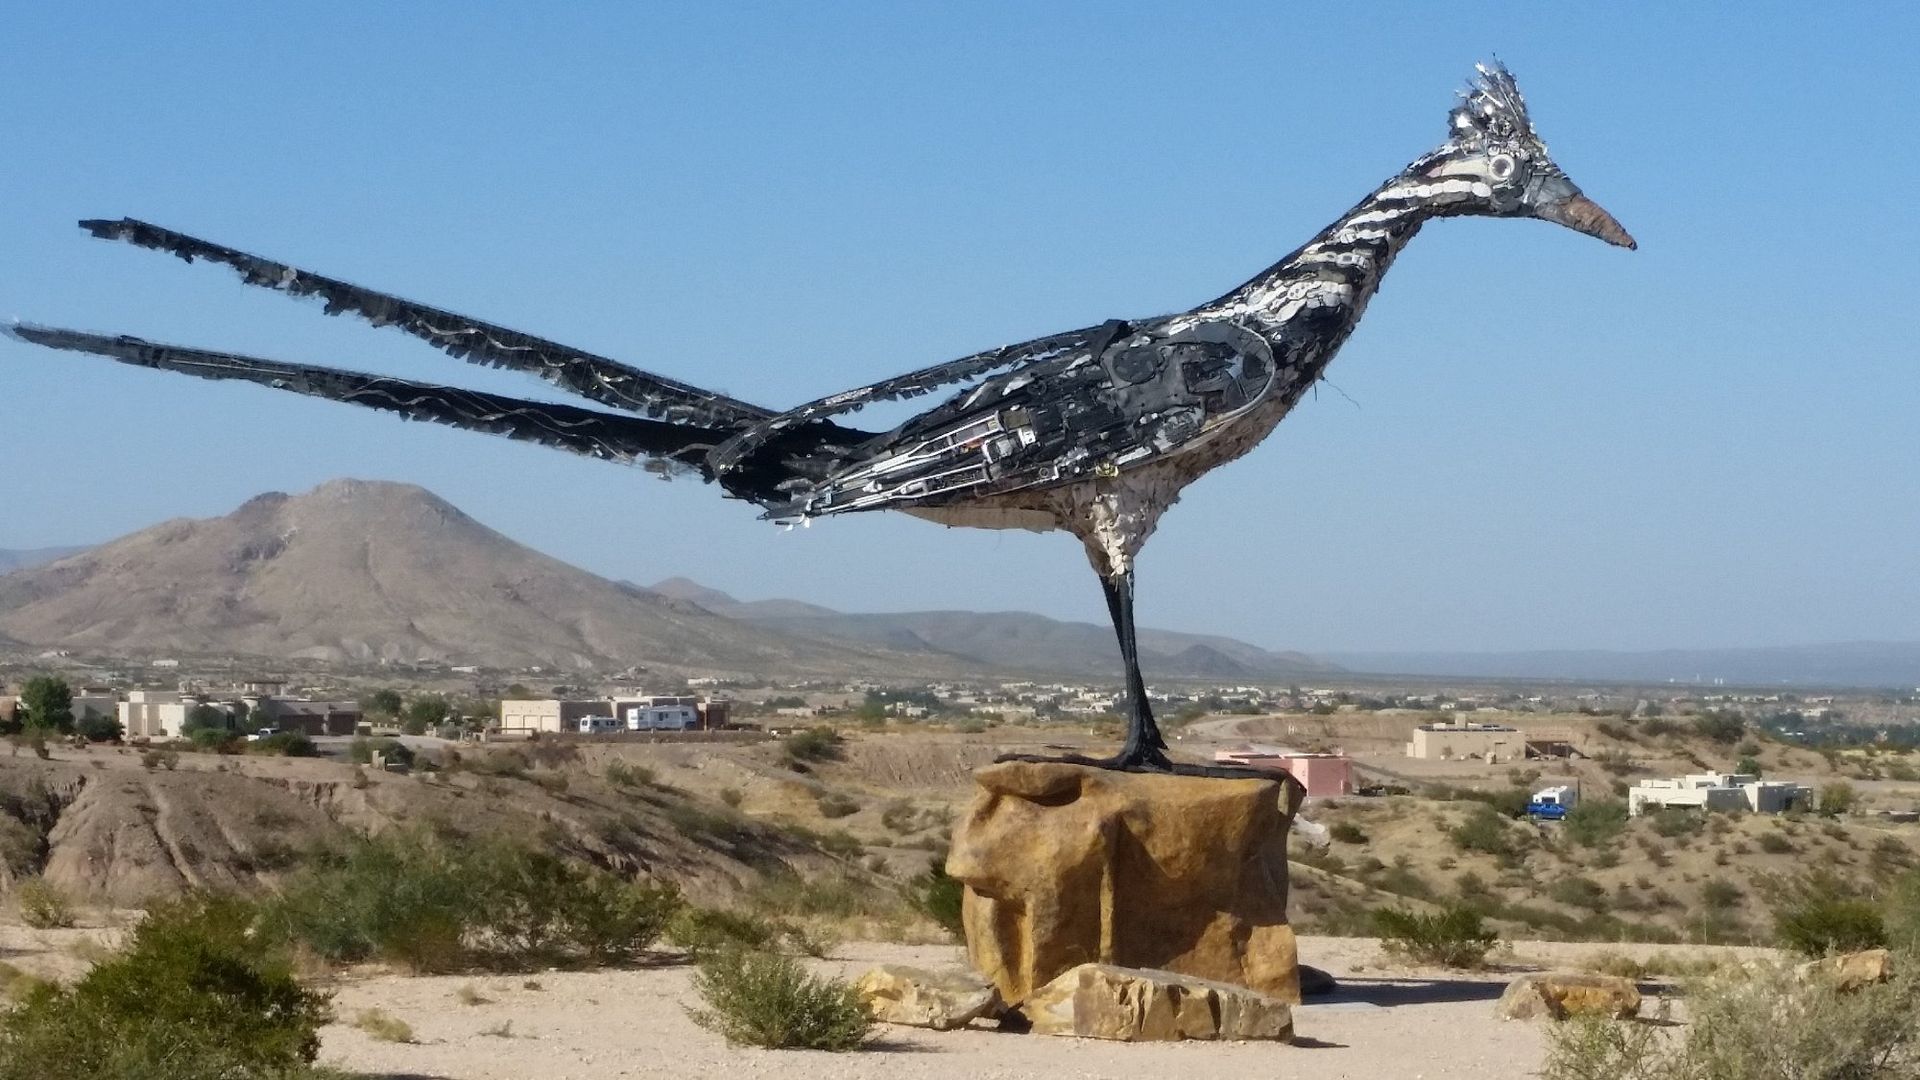 World's Largest Recycled Roadrunner Sculpture, world record in Las Cruces, New Mexico